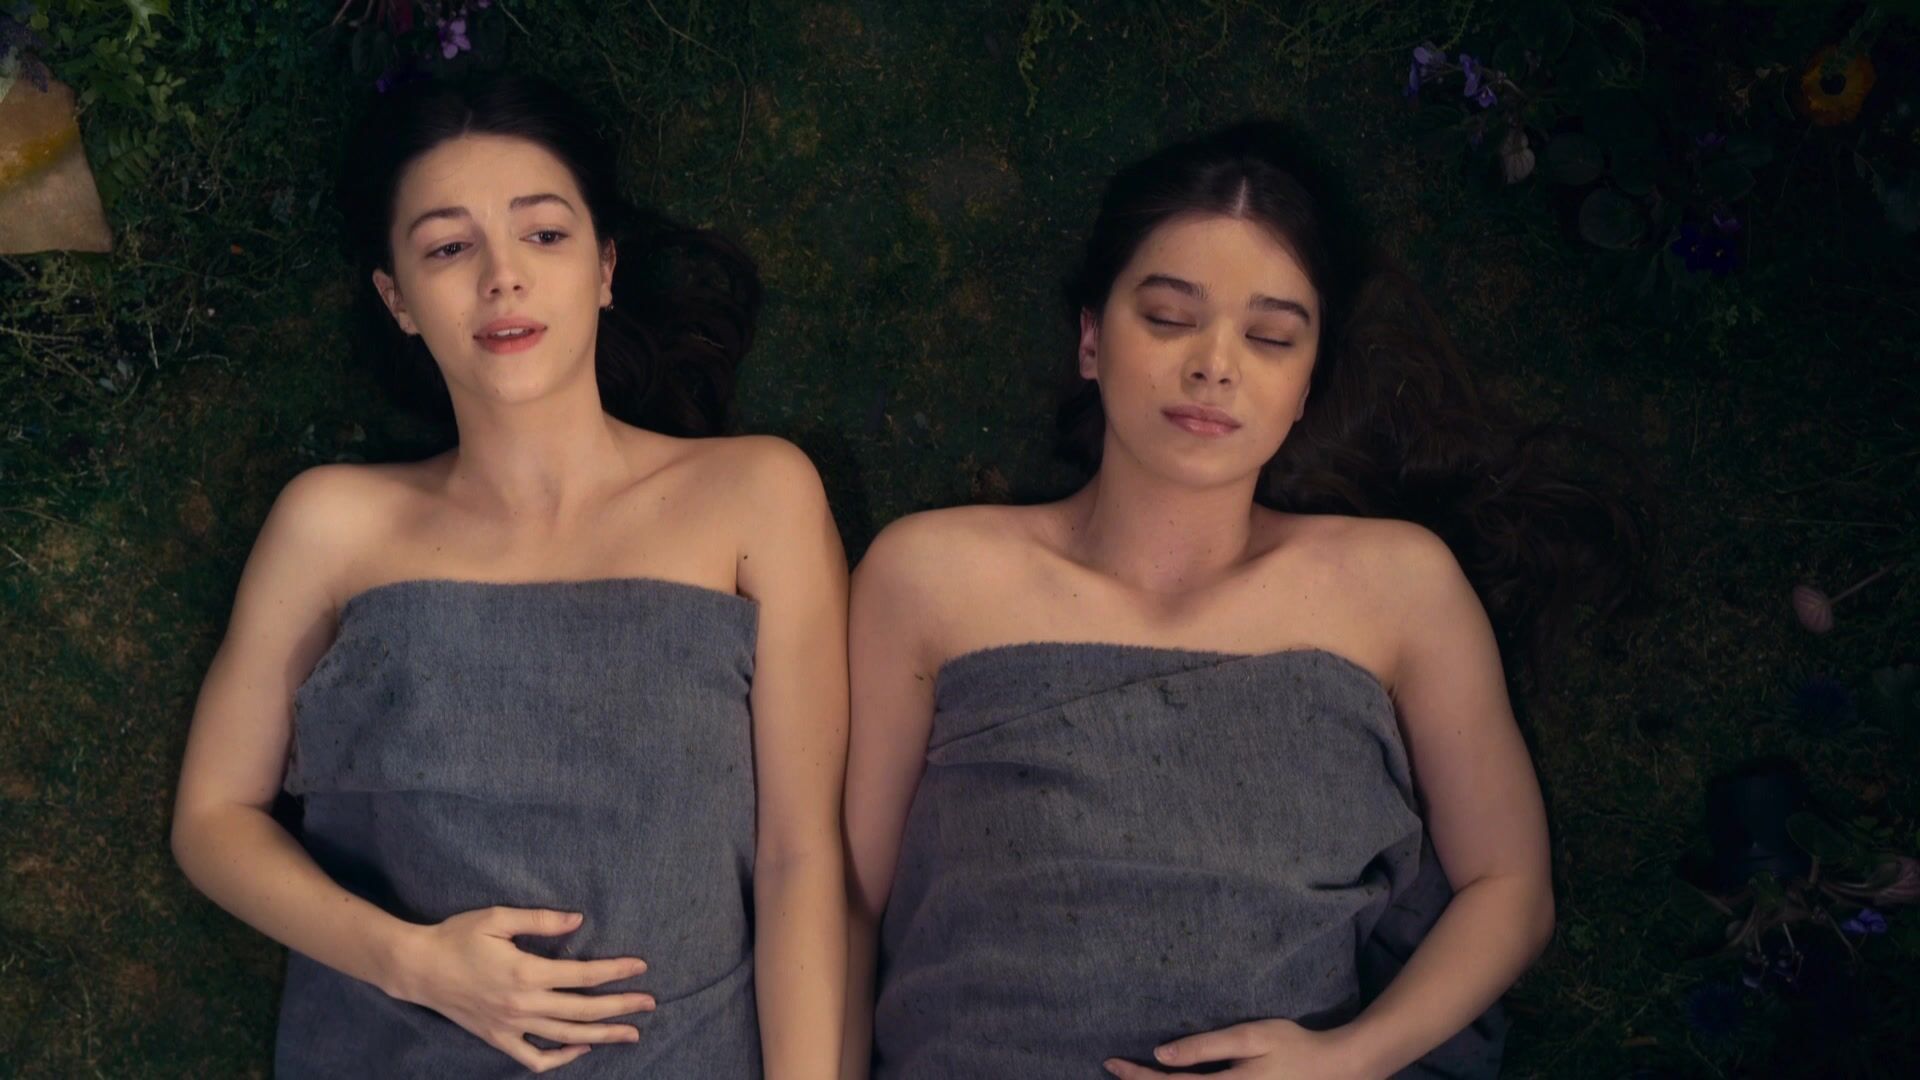 Bucetinha Hailee Steinfeld's sexy lesbian scenes from Dickinson s02e10 (2021) Mature Woman - 1